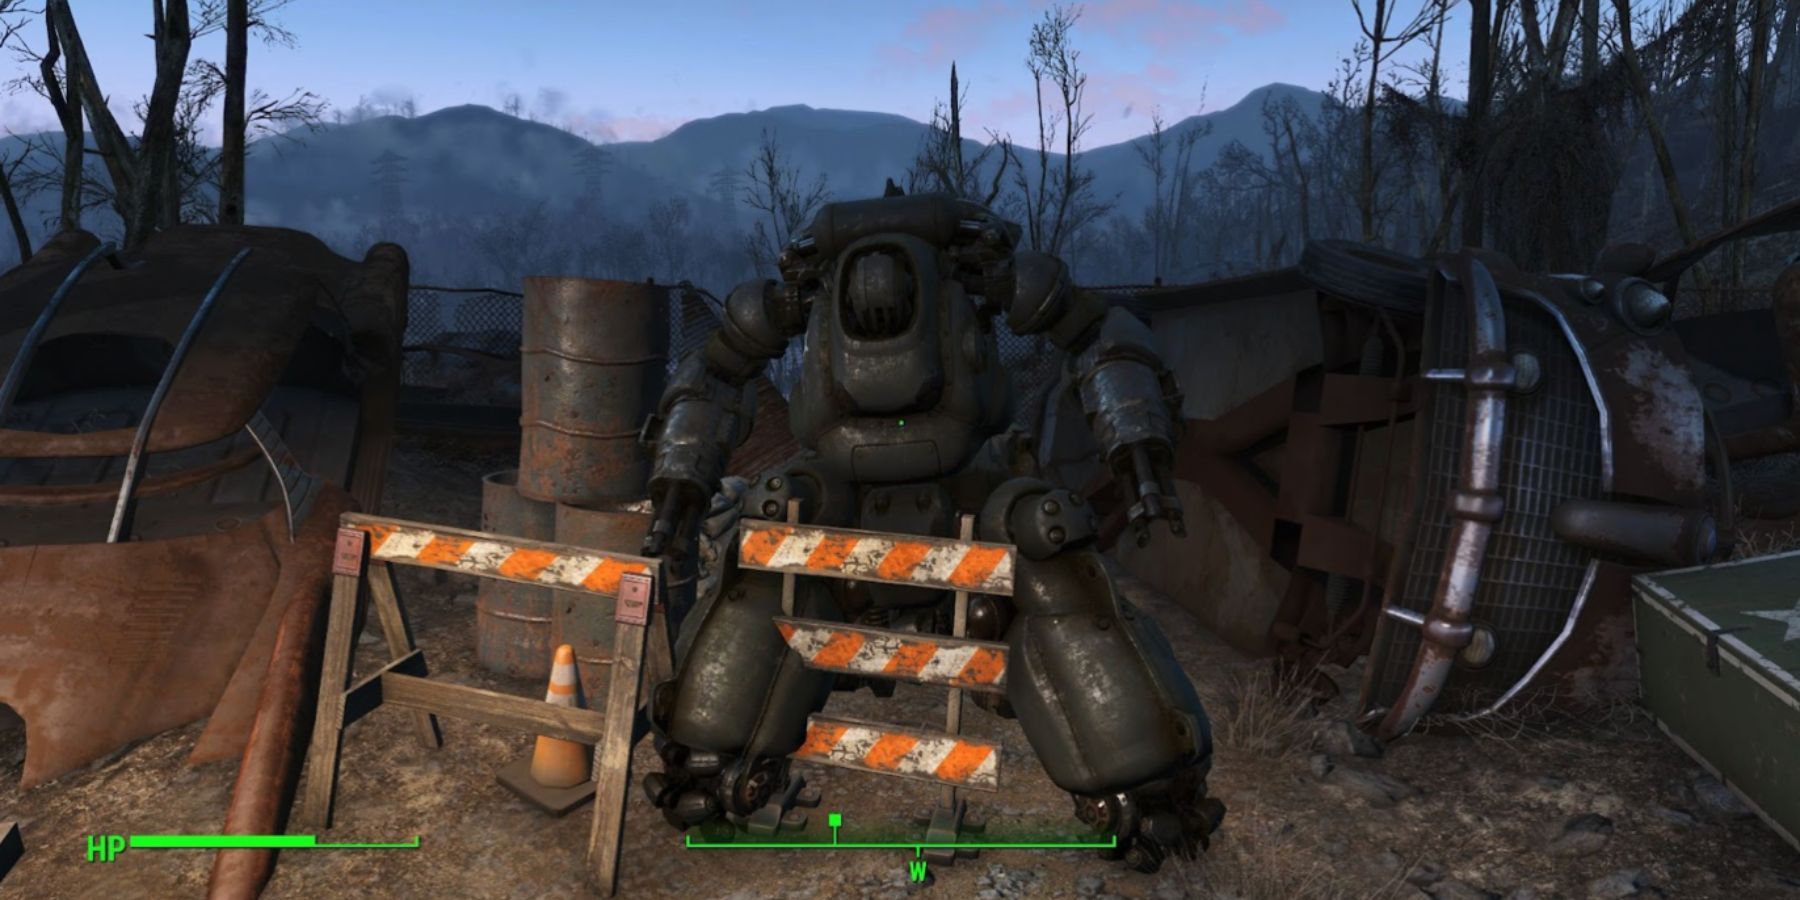 Sentry Bot in Fallout 4